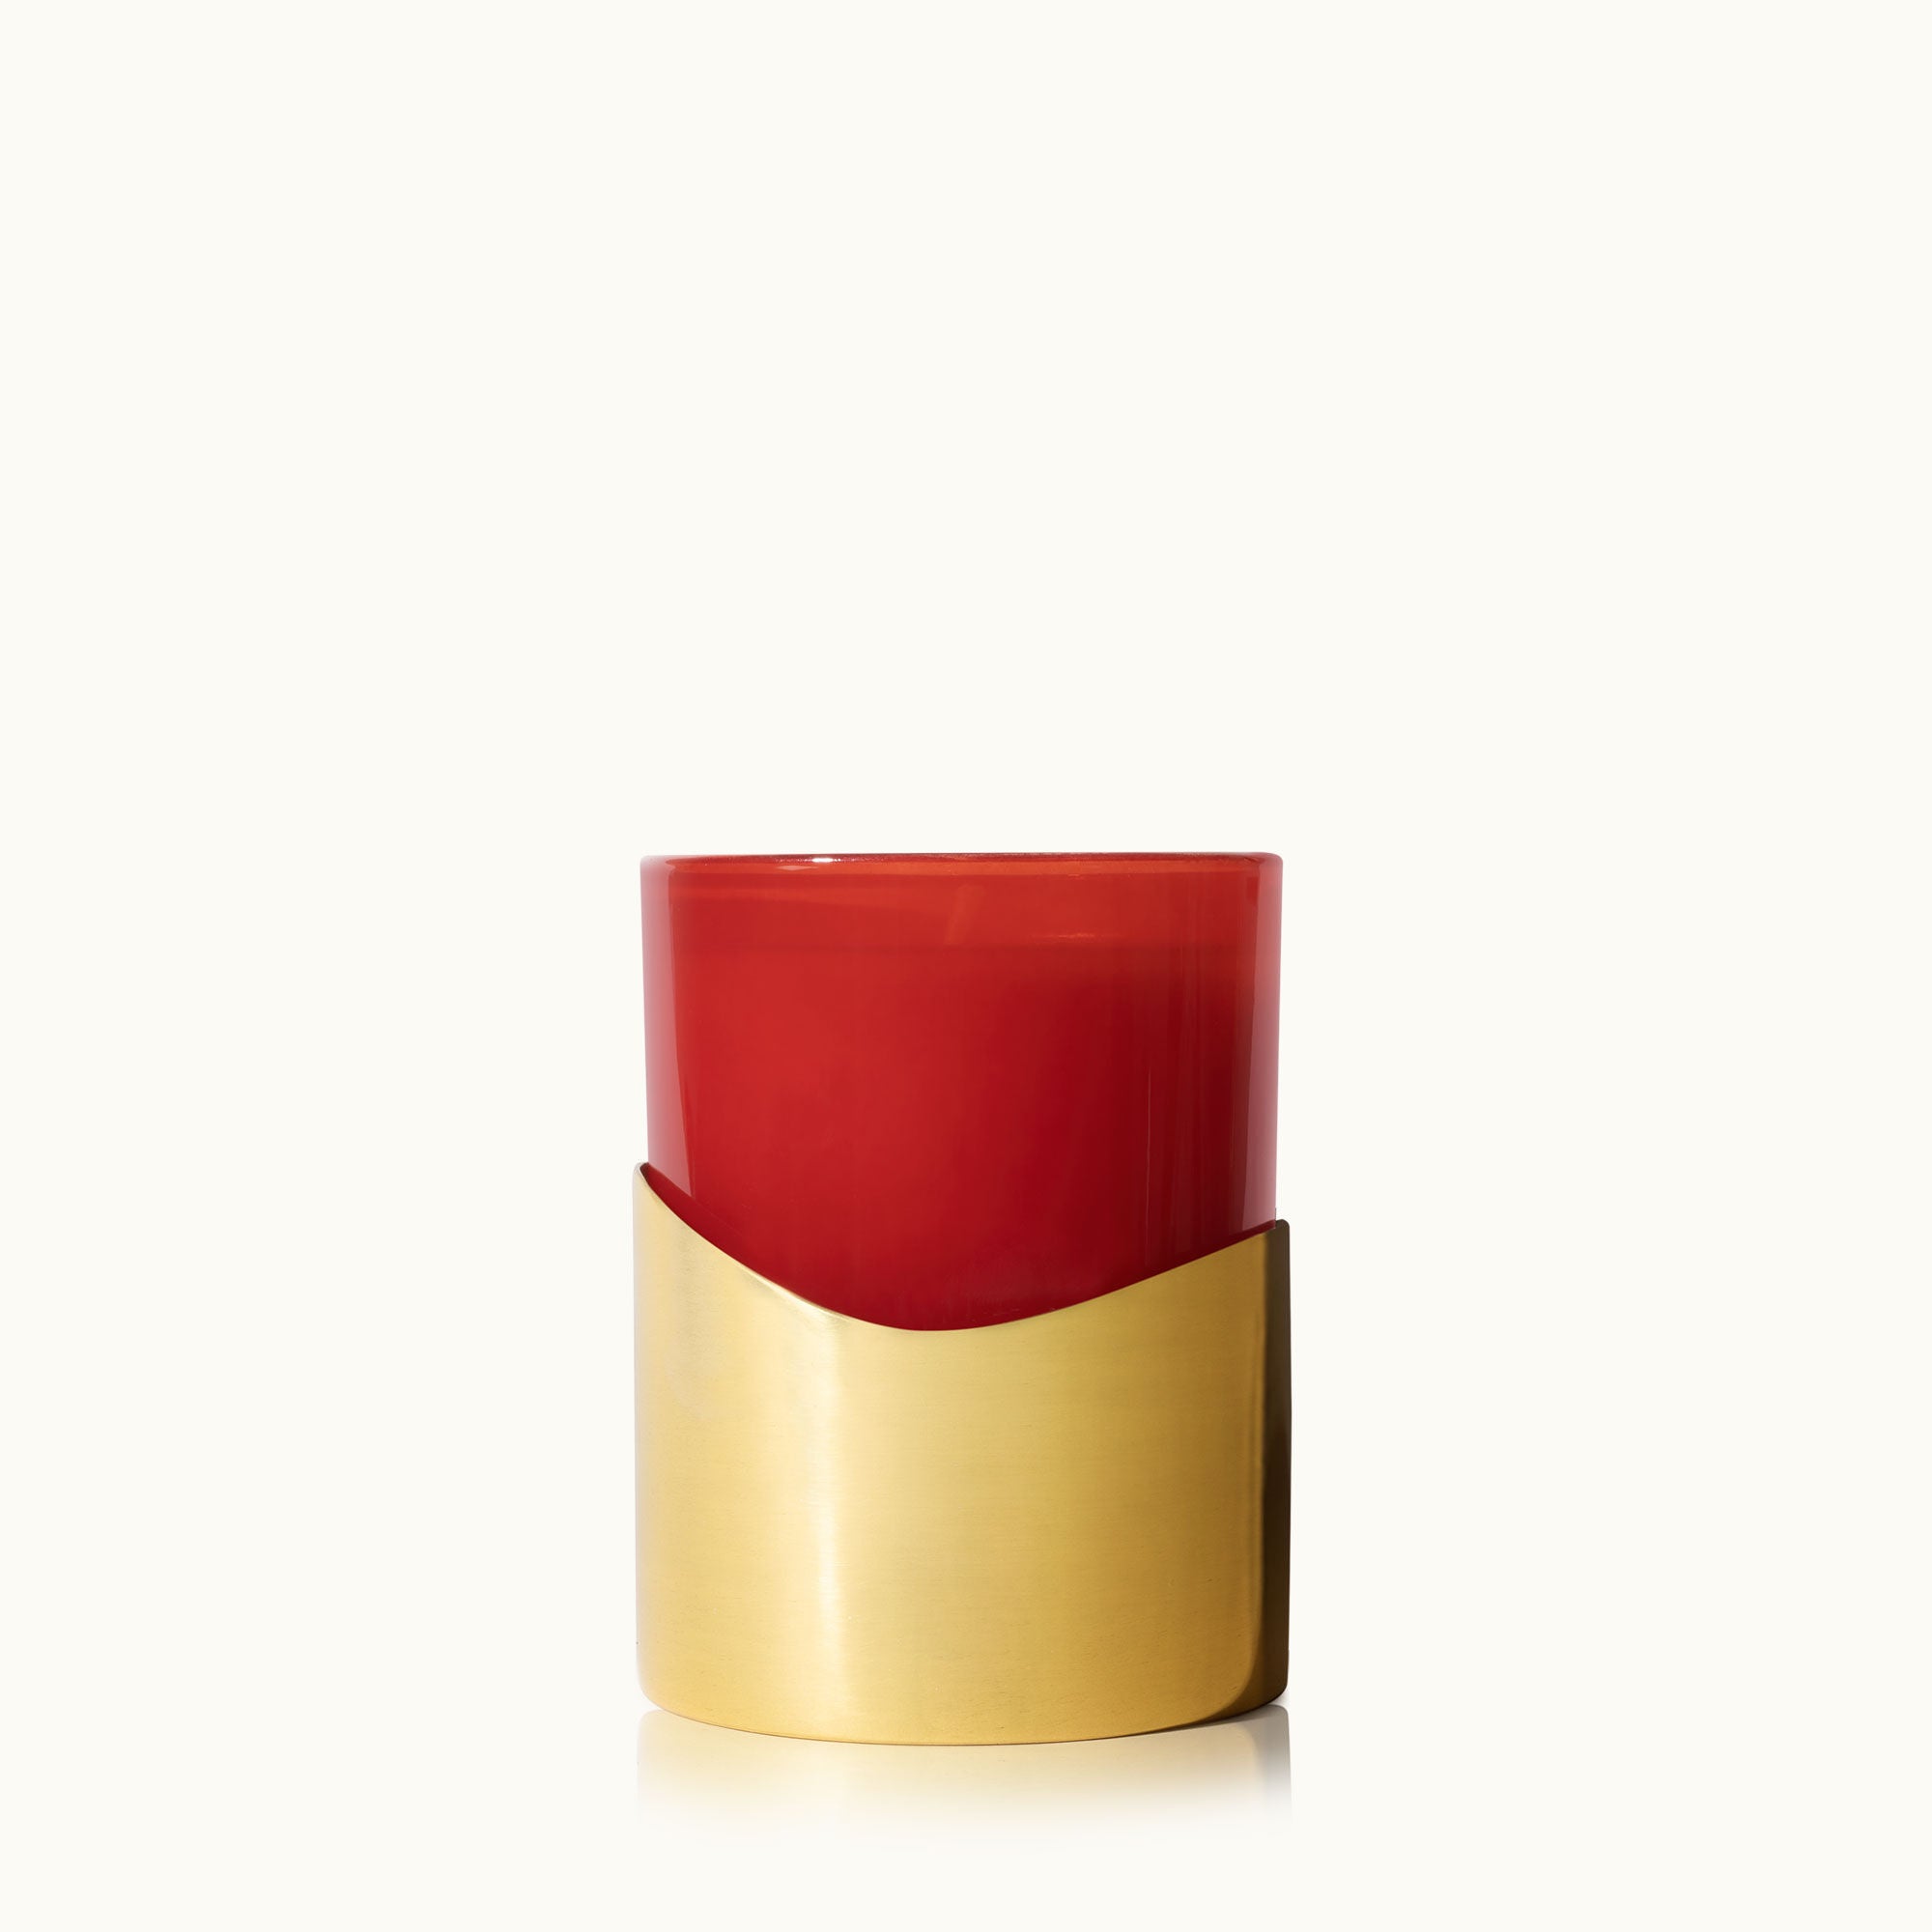 THYMES Simmered Cider Harvest Red Poured Candle with Gold Sleeve